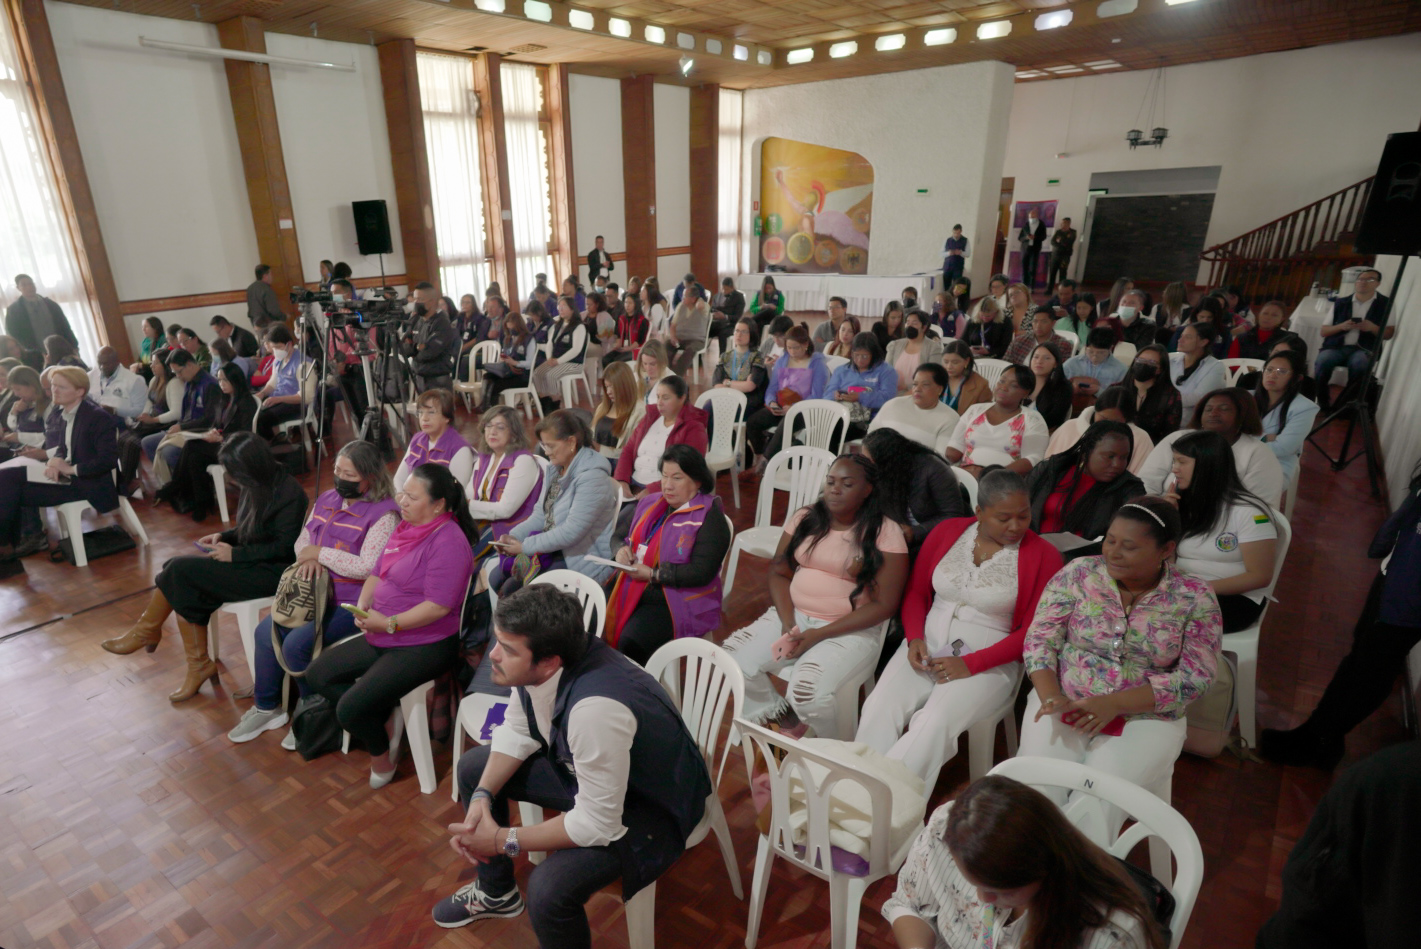 Foto: ONU Mujeres Colombia/Luis Ponce